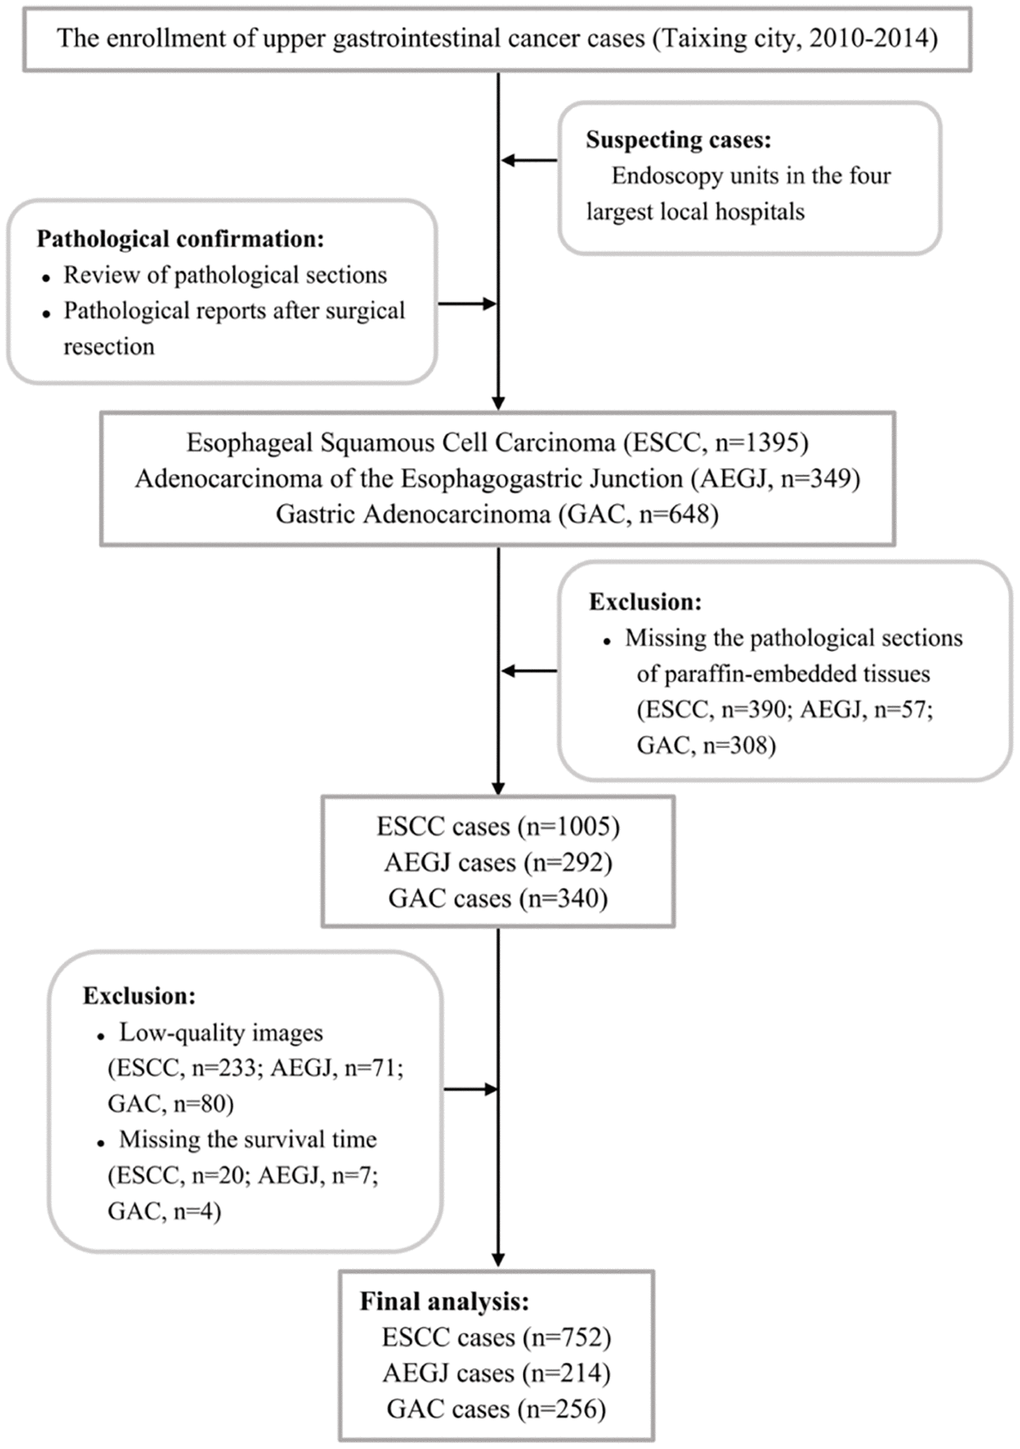 The flowchart of inclusion and exclusion of ESCC, AEGJ, and GAC cases in Taixing, Jiangsu (2010–2014).